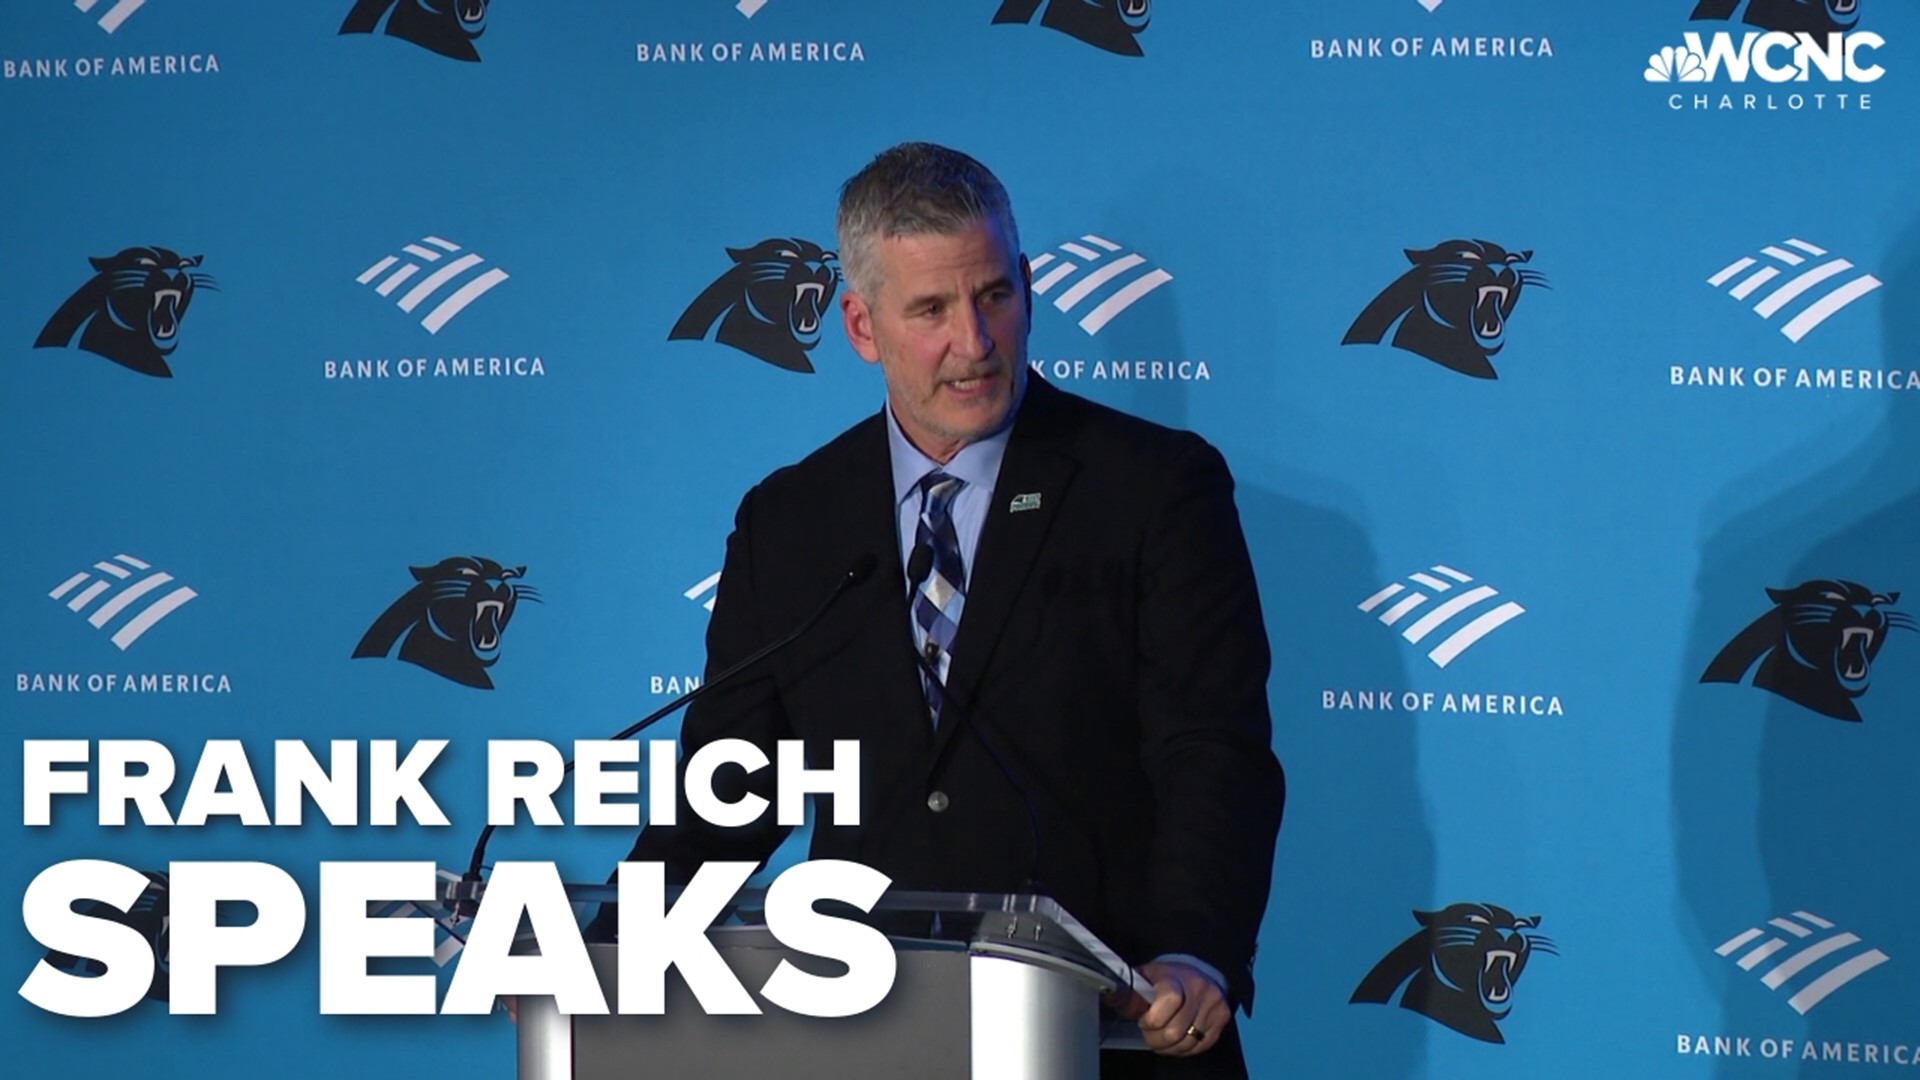 The Carolina Panthers officially introduced Frank Reich as their next head coach.